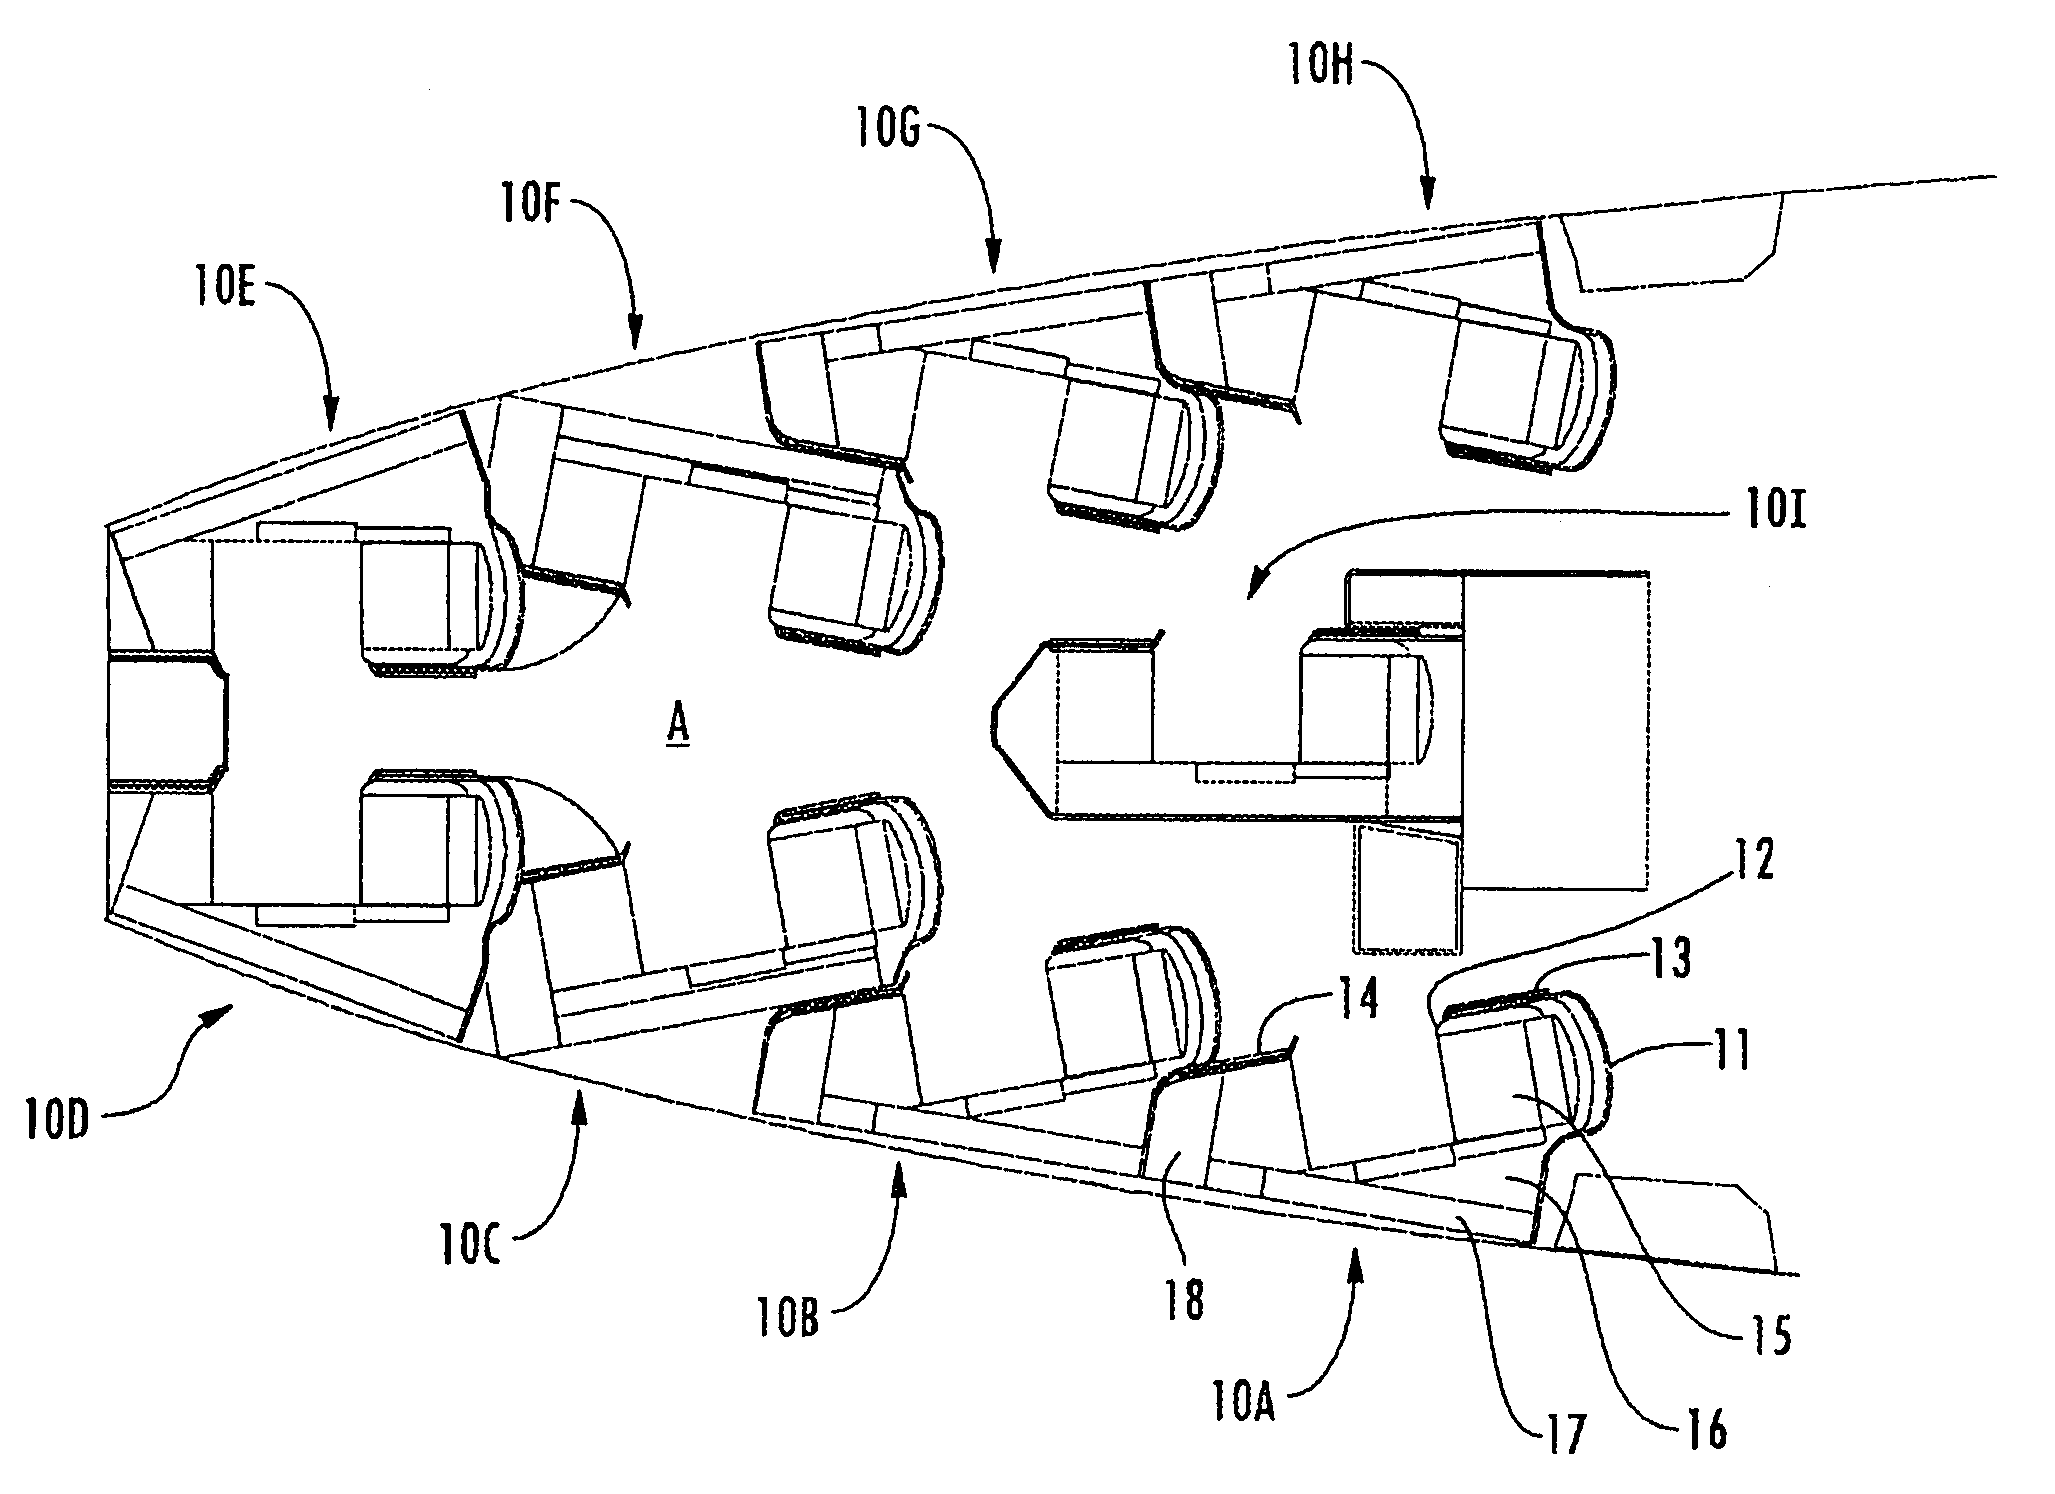 Aircraft passenger accommodation unit with deployable bed